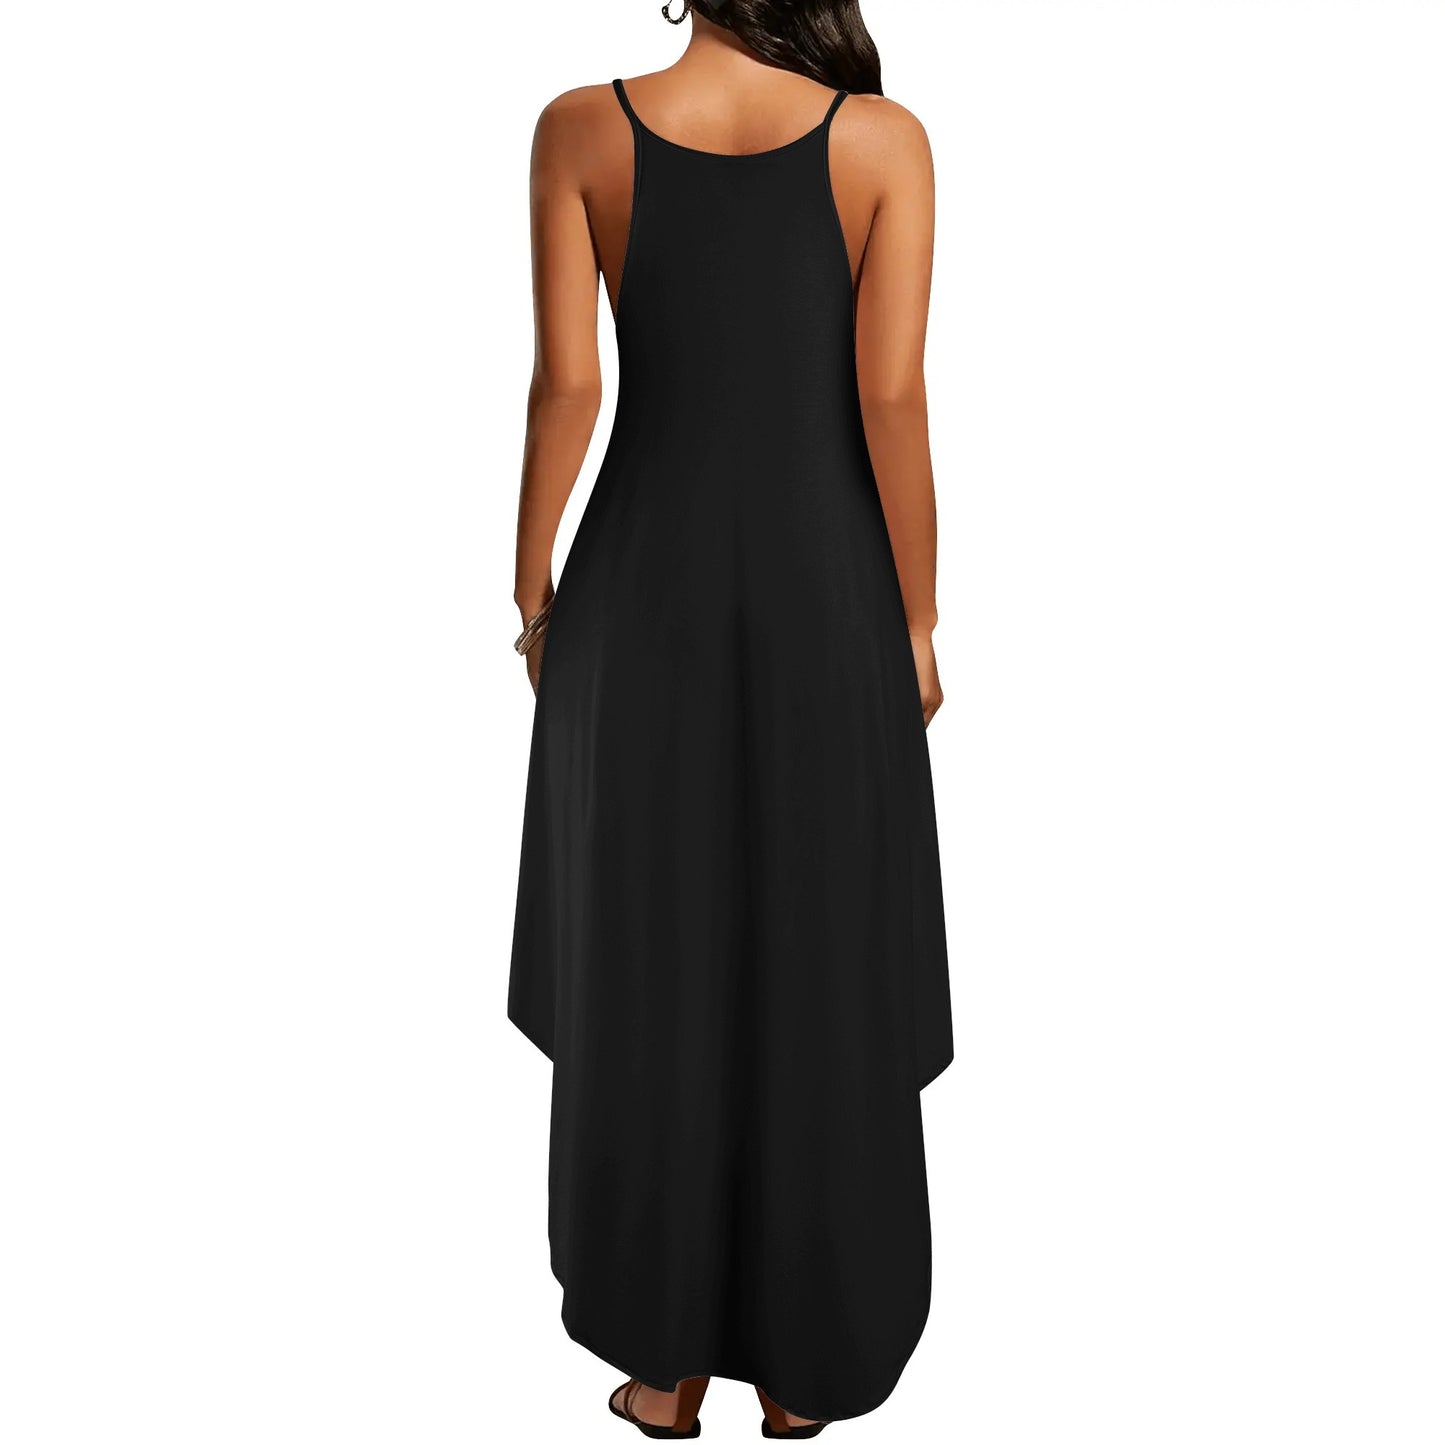 In Christ I Am Everything The World Said I Couldnt Be Womens Christian Elegant Sleeveless Summer Maxi Dress popcustoms